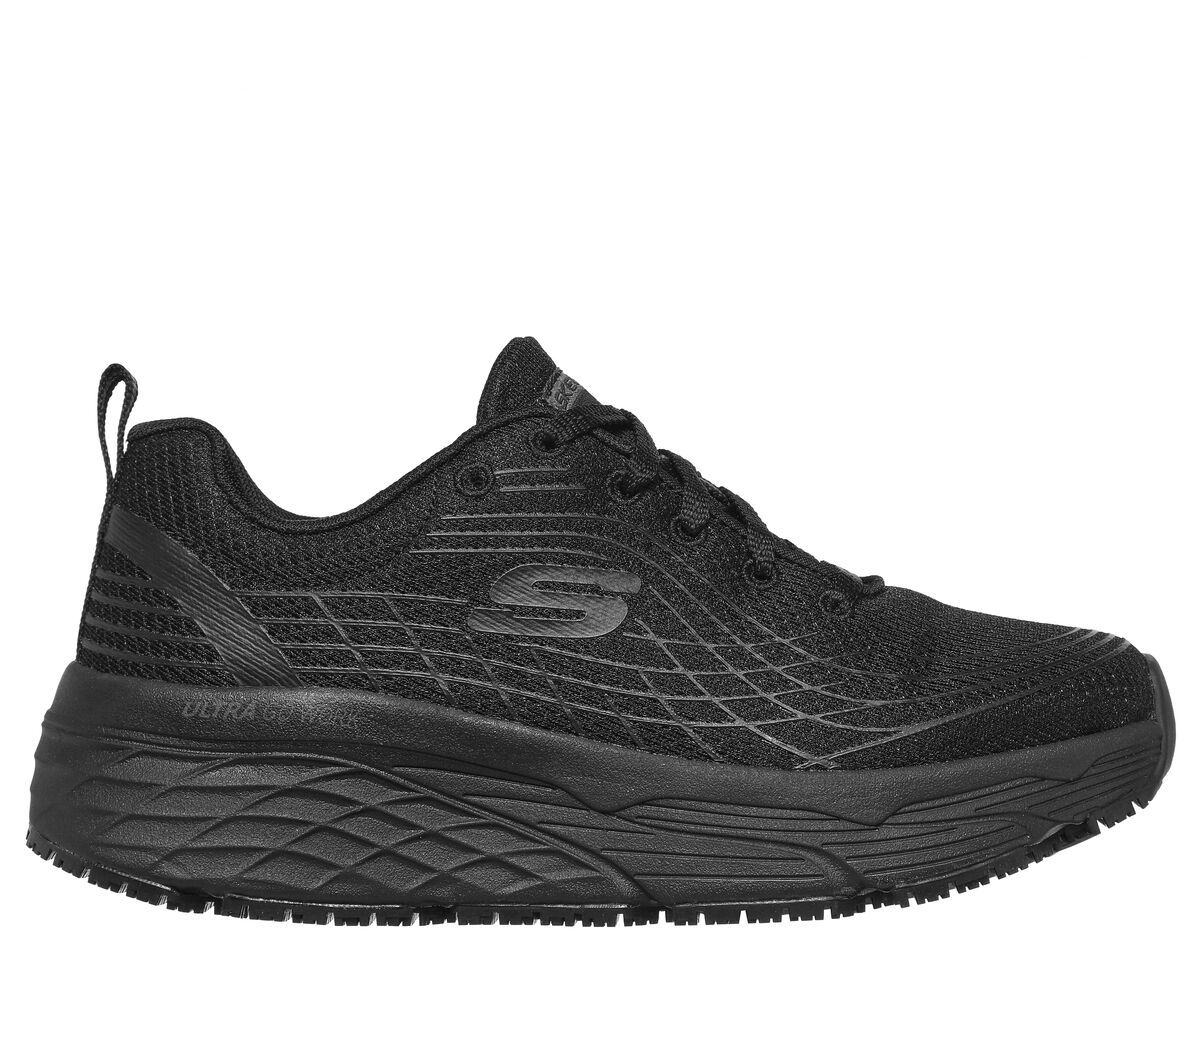 Work Relaxed Fit: SR | Cushioning Elite SKECHERS Max